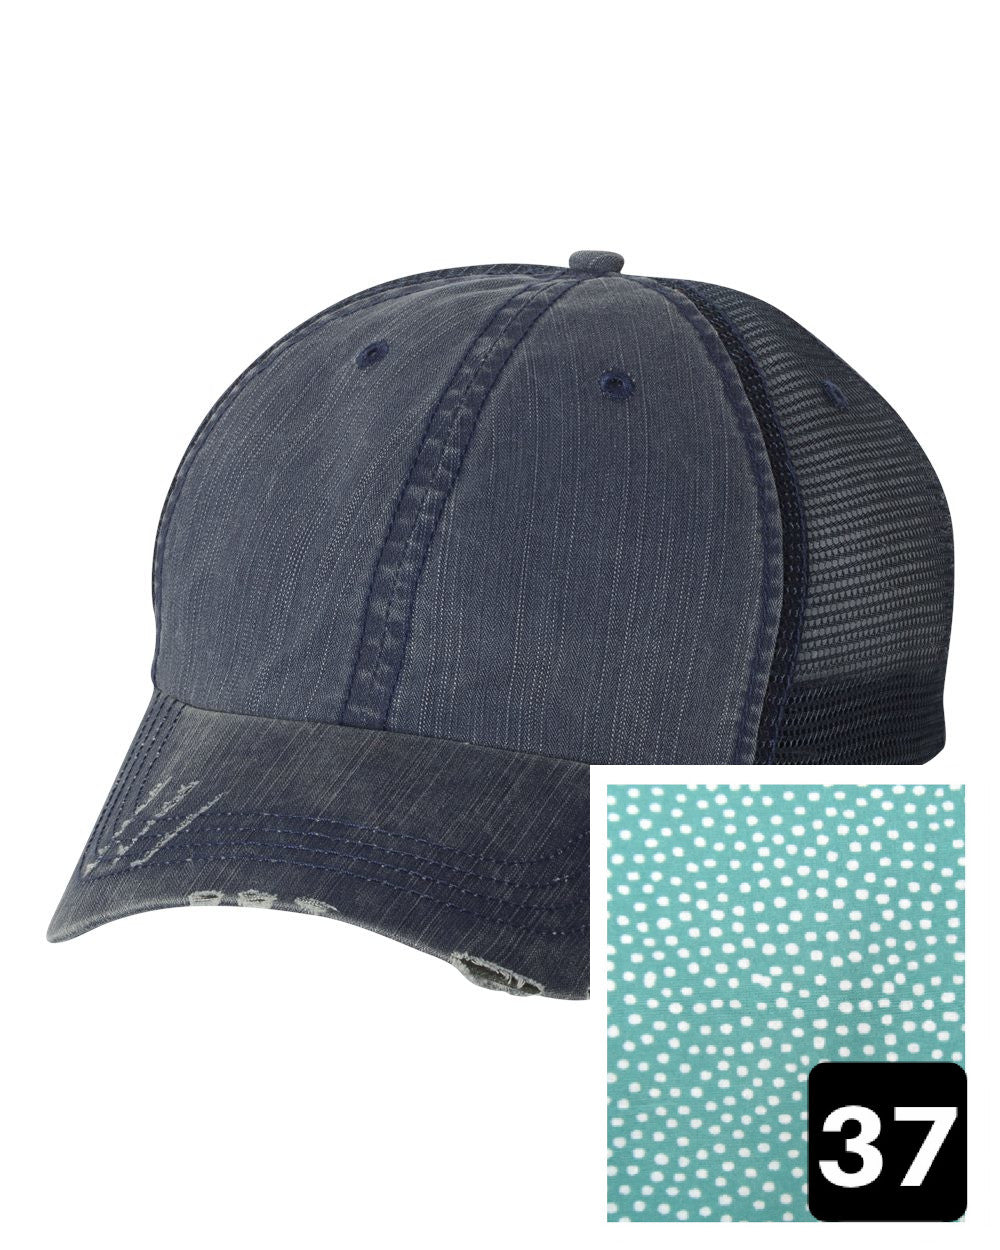 Colorado Hat | Navy Distressed Trucker Cap | Many Fabric Choices